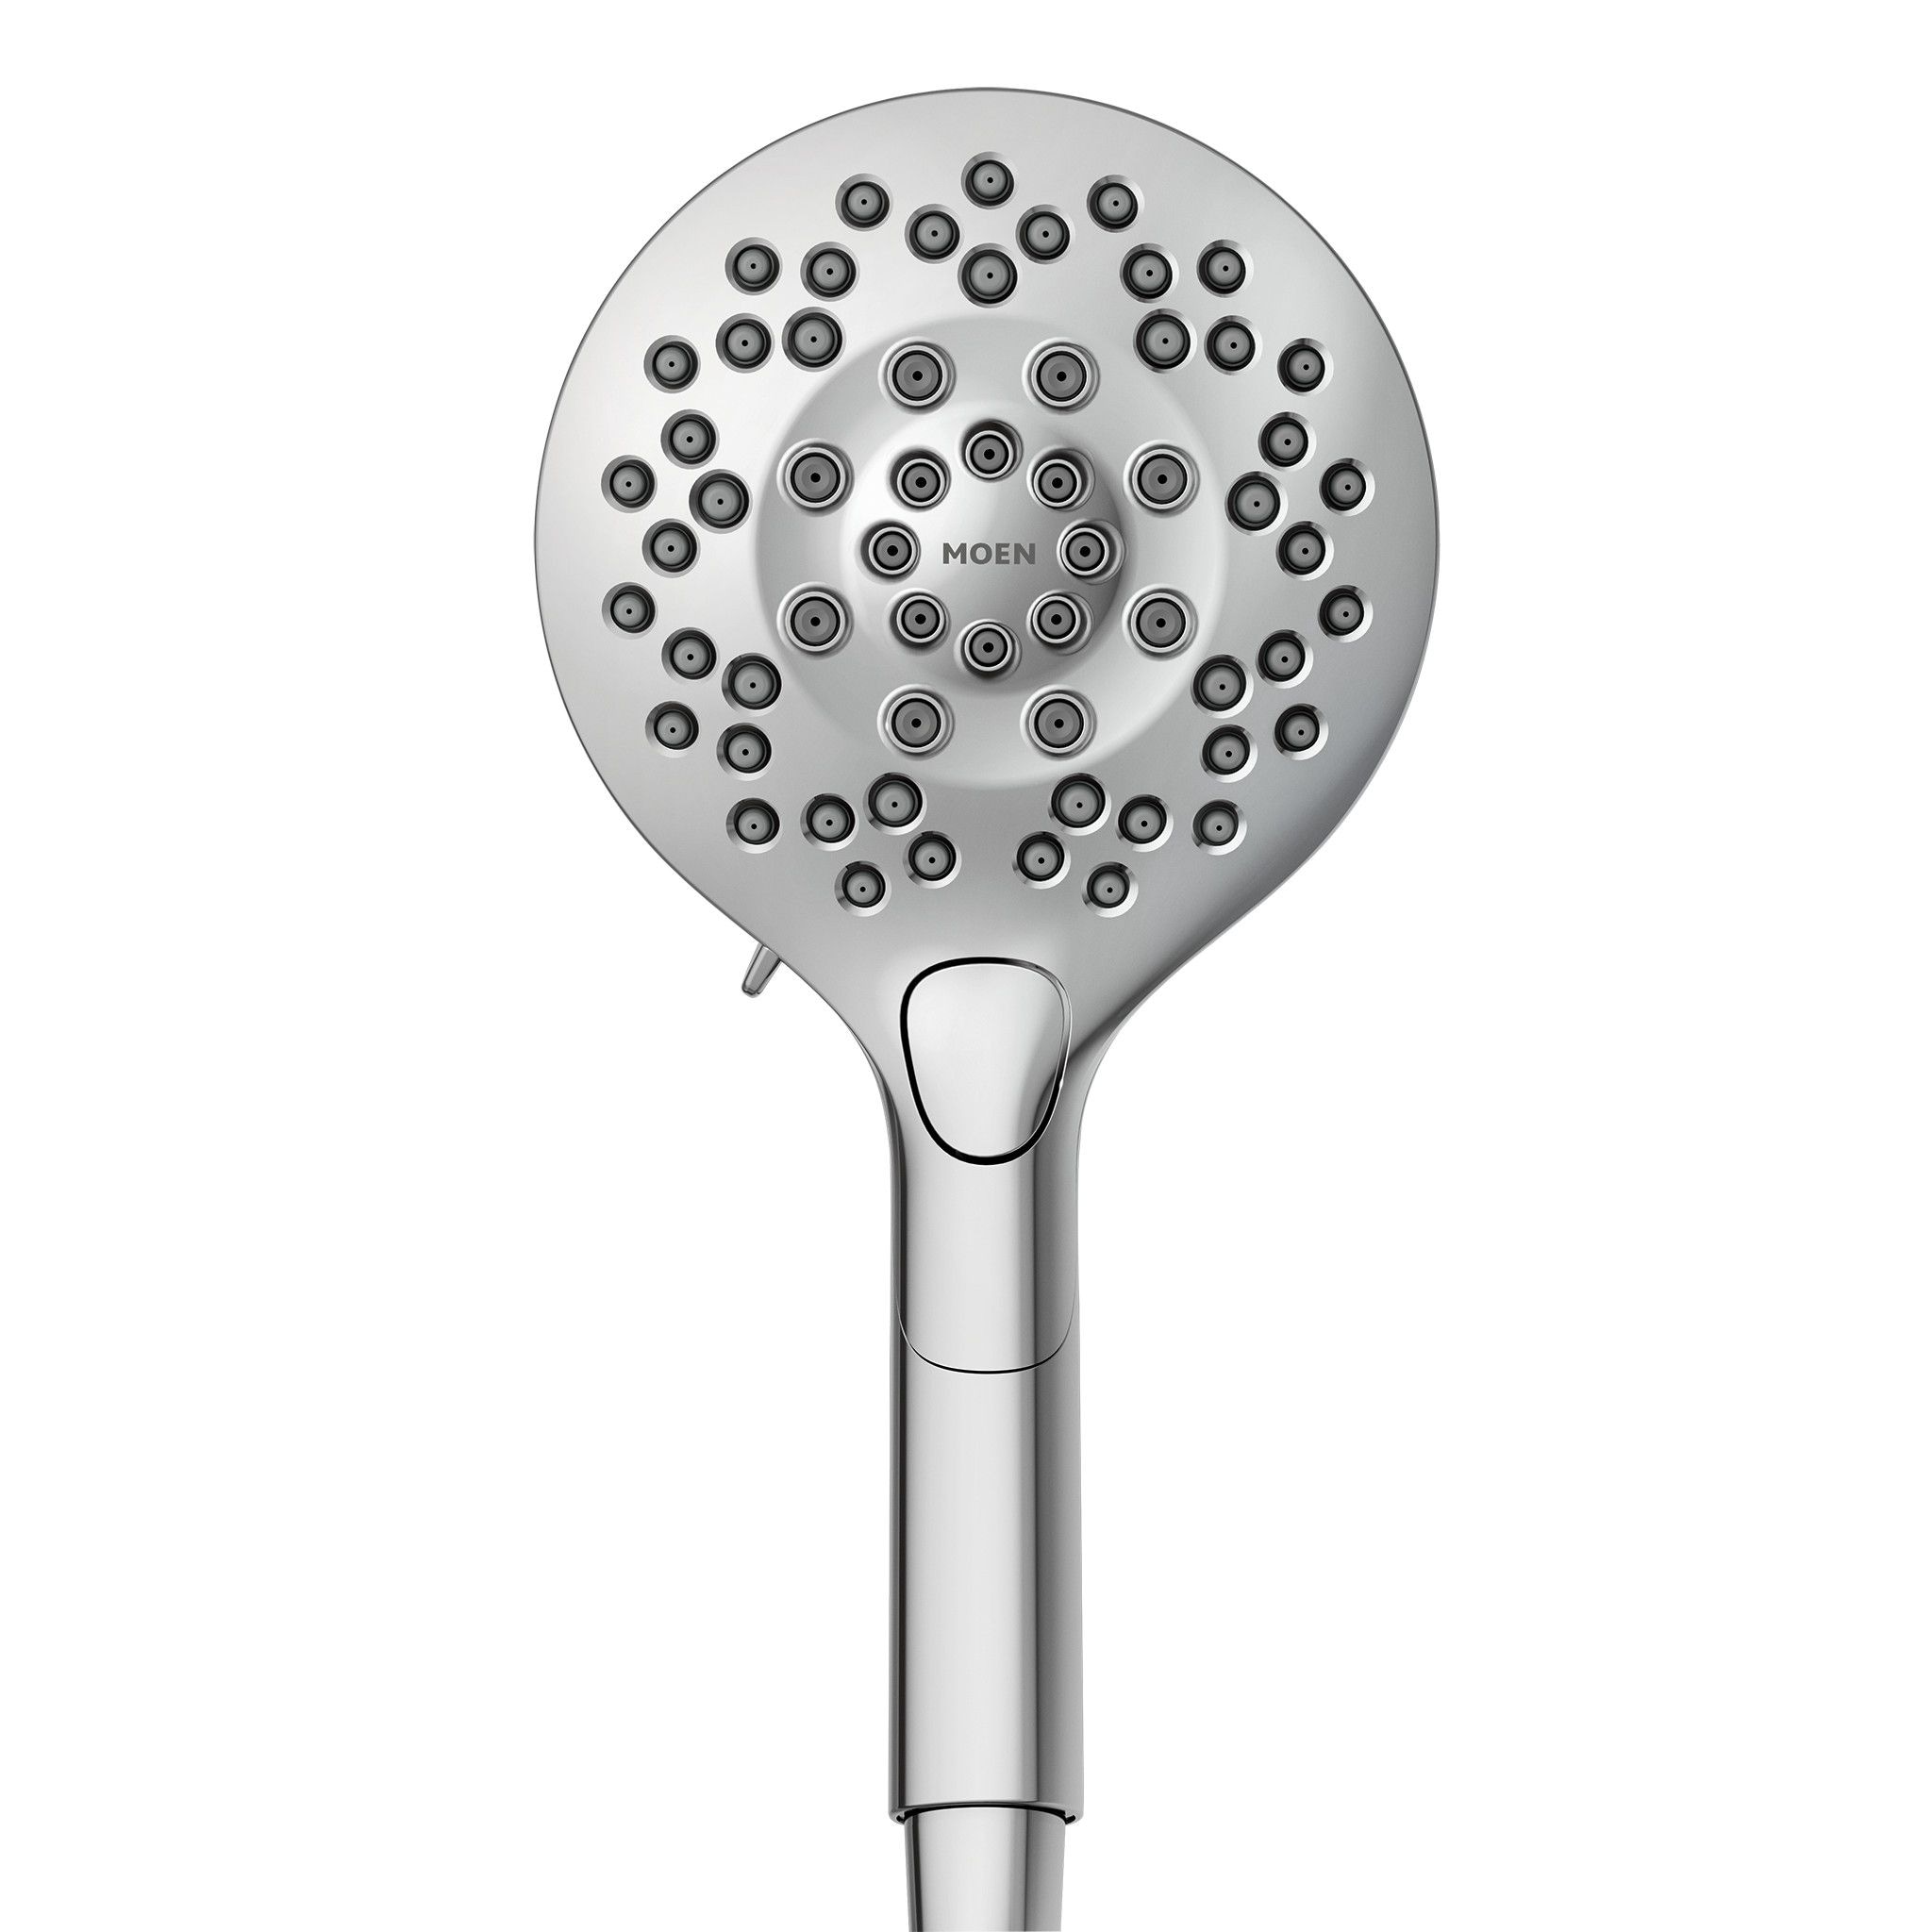 Moen Inly Chrome Handheld Shower Head 1.75-GPM (6.6-LPM) in the Shower ...